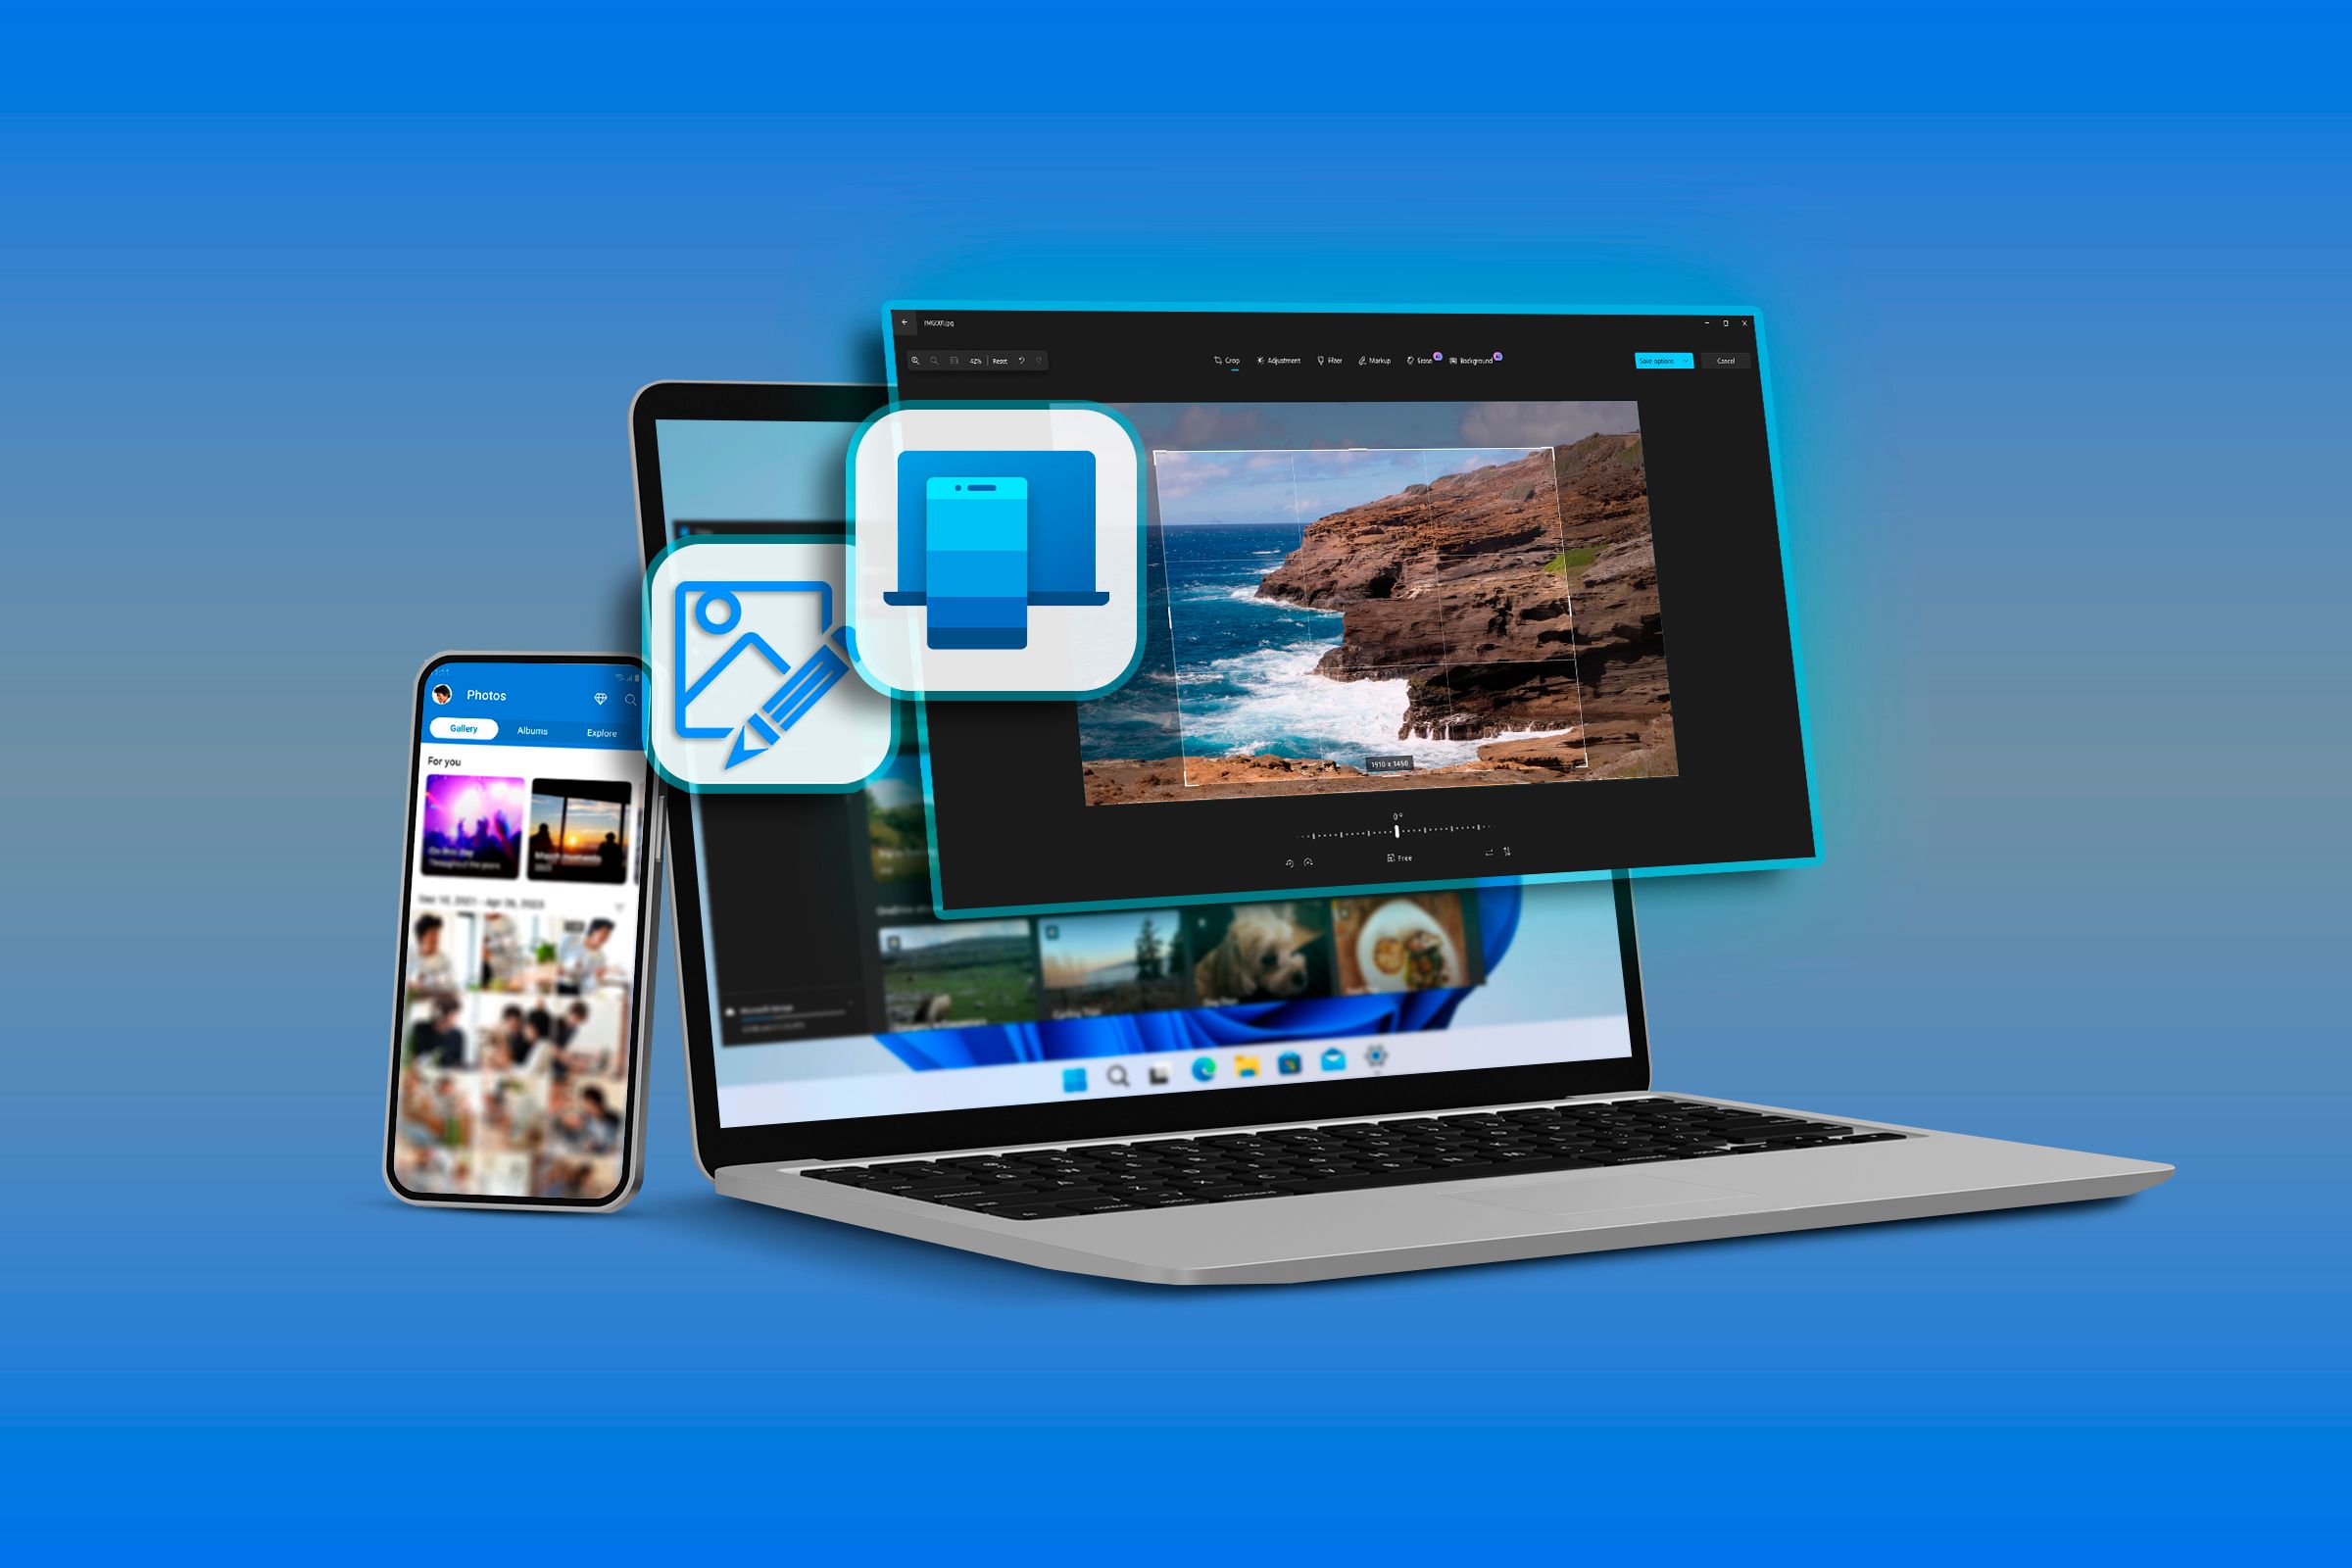 A smartphone with the photo gallery open and a laptop next to it with an image being edited on Windows.